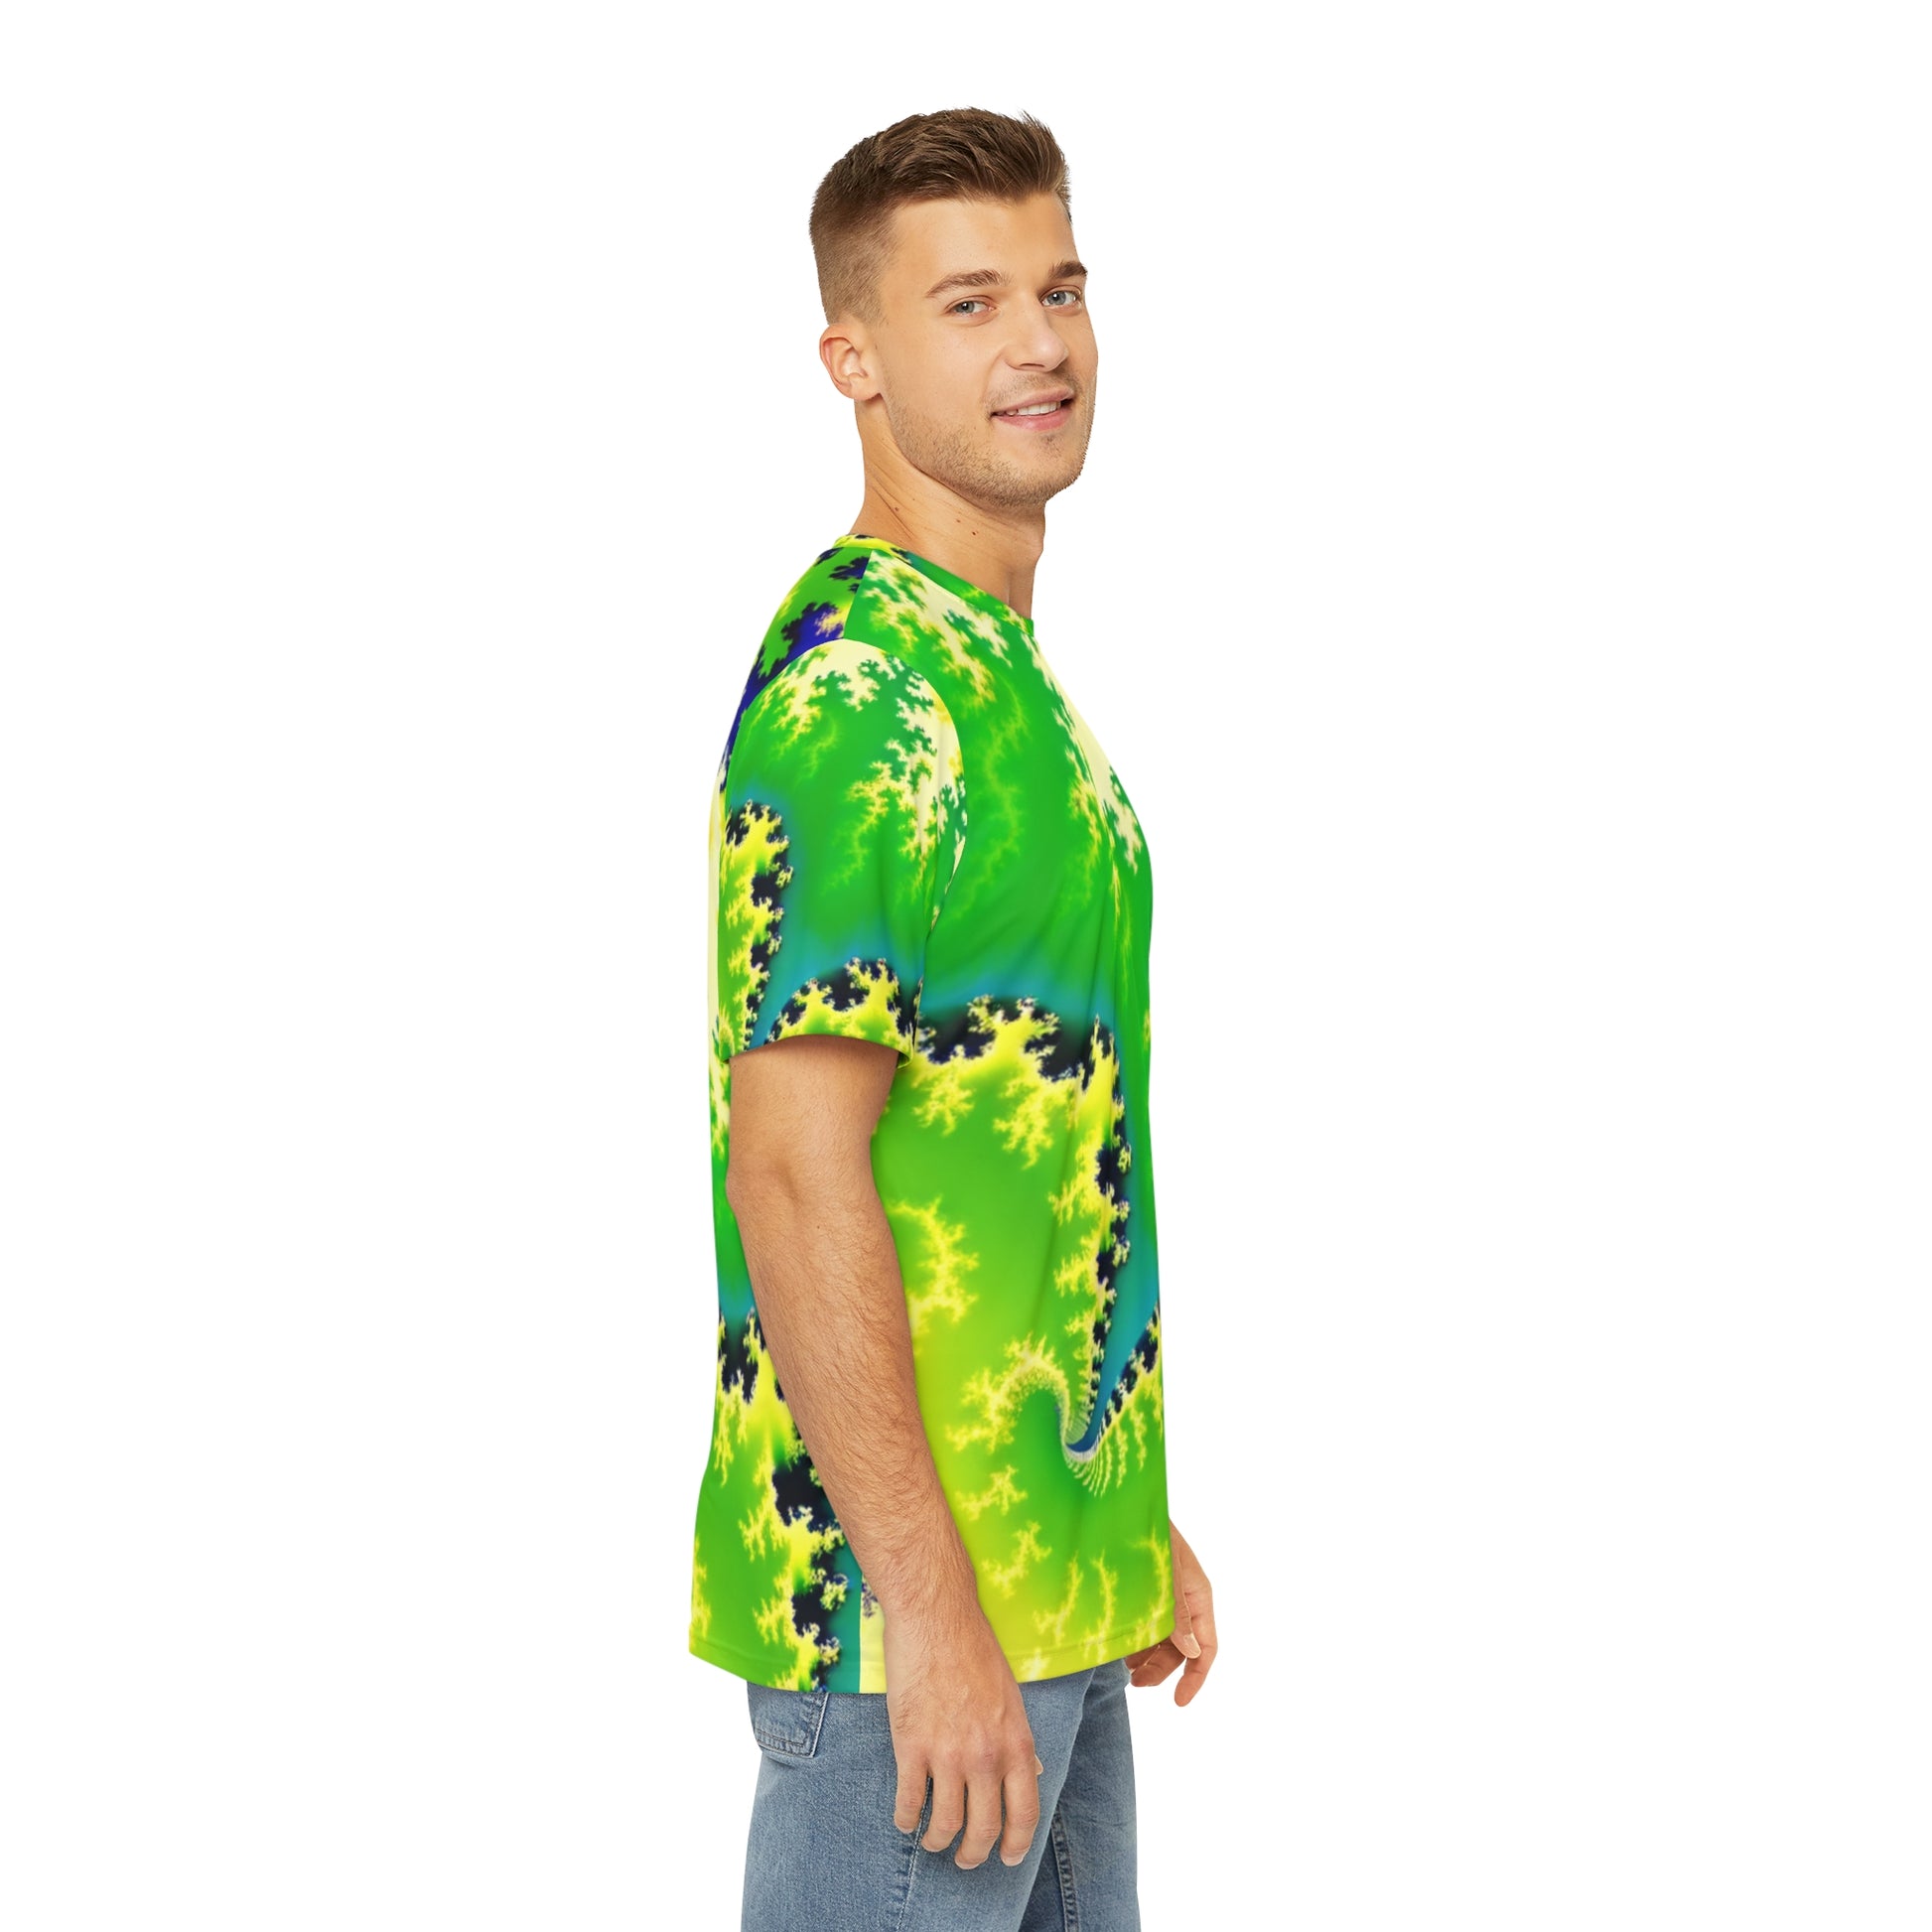 Side view of the Psychedelic Serpentine Fractal Fusion Crewneck Pullover All-Over Print Short-Sleeved Shirt green yellow blue black psychedelic pattern paired with casual denim pants worn by a white man